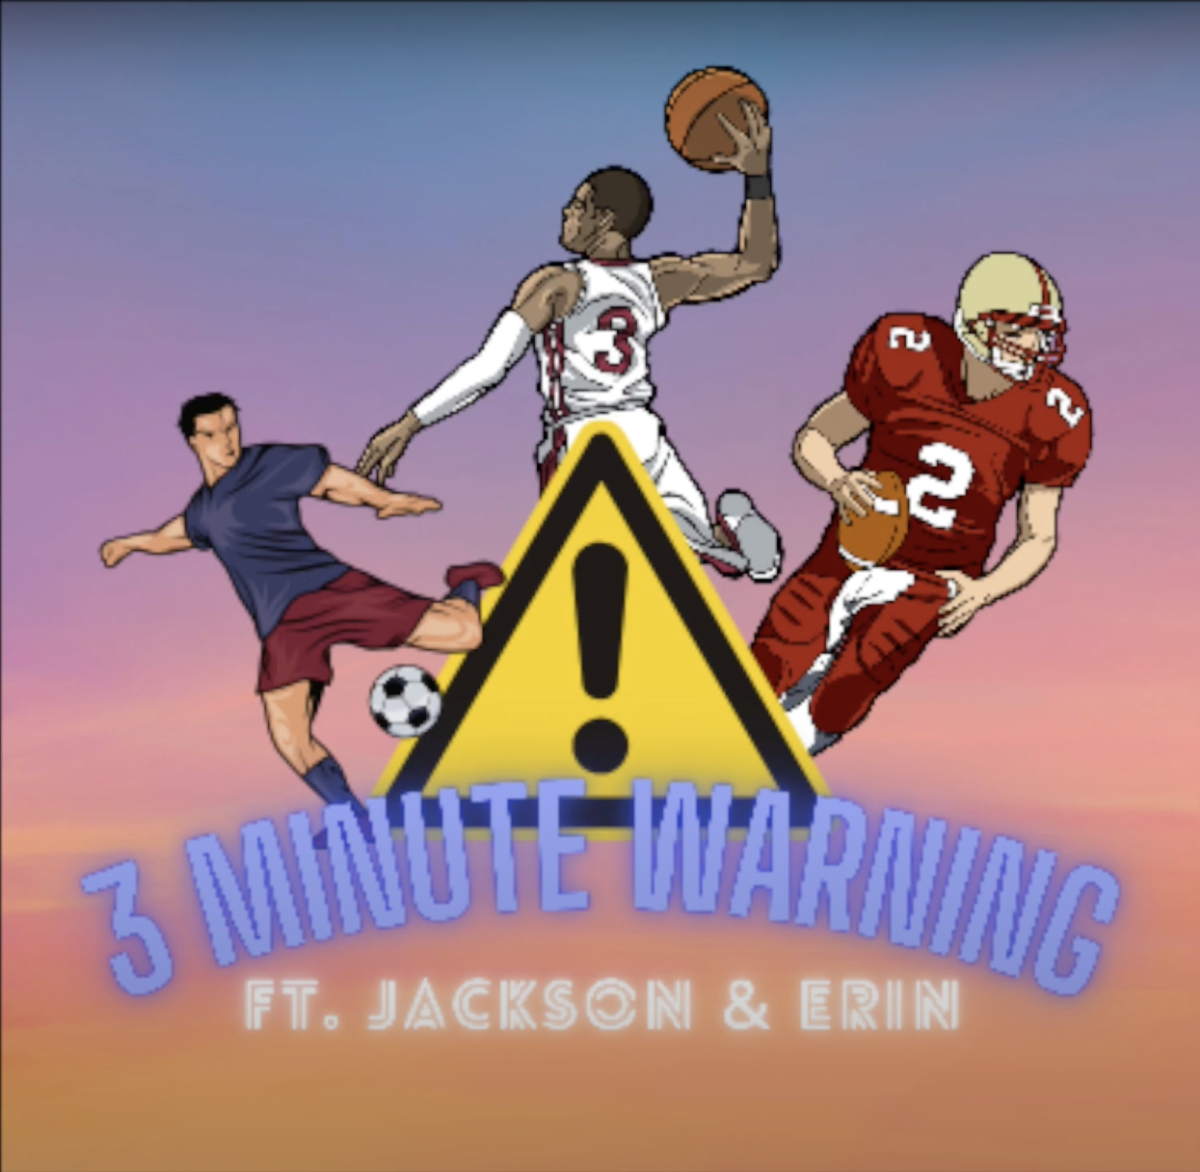 Introducing 3 Minute Warning, Our New Sports Podcast